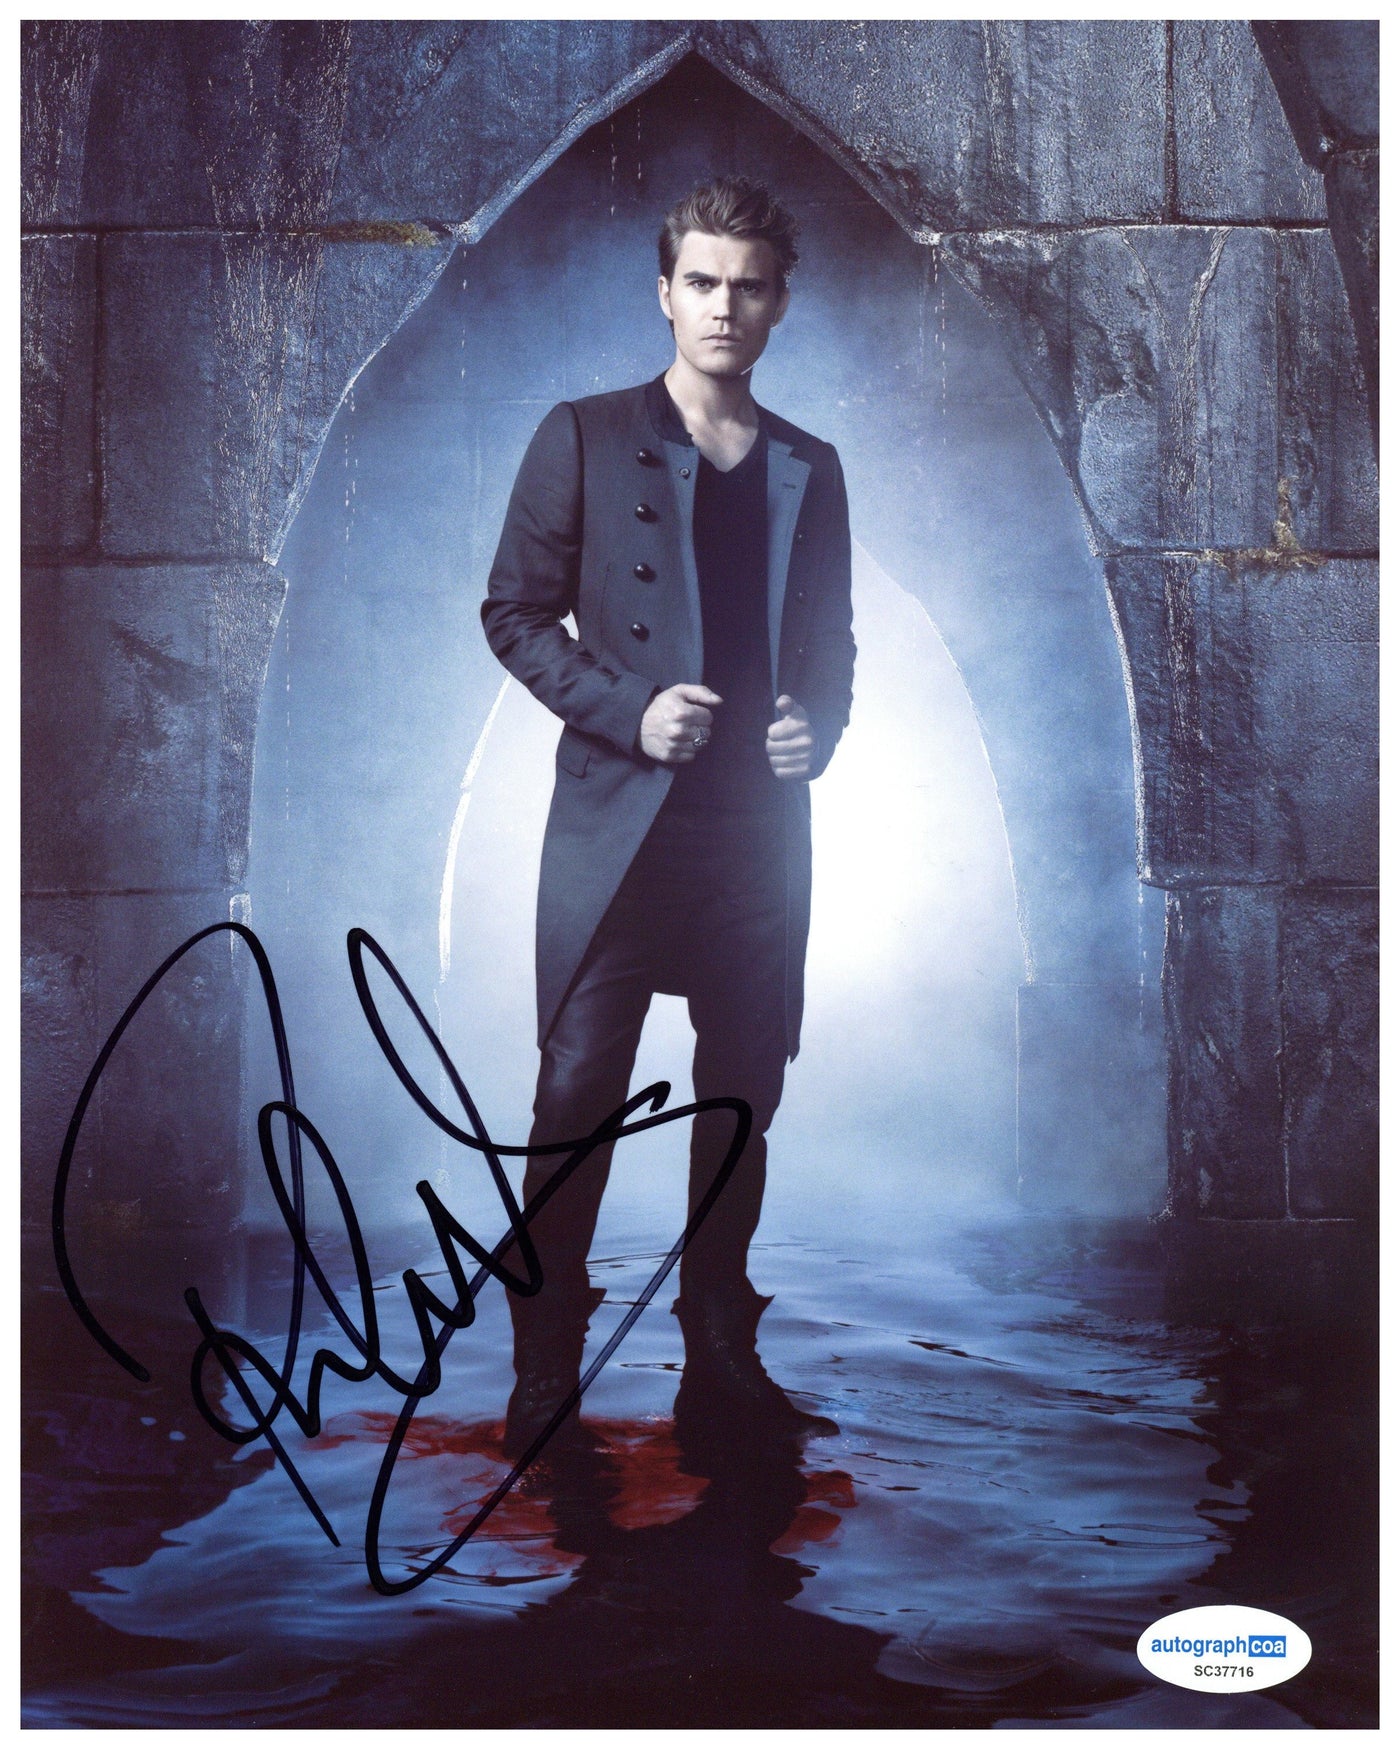 Paul Wesley Signed 8x10 Photo The Vampire Diaries Autographed ACOA